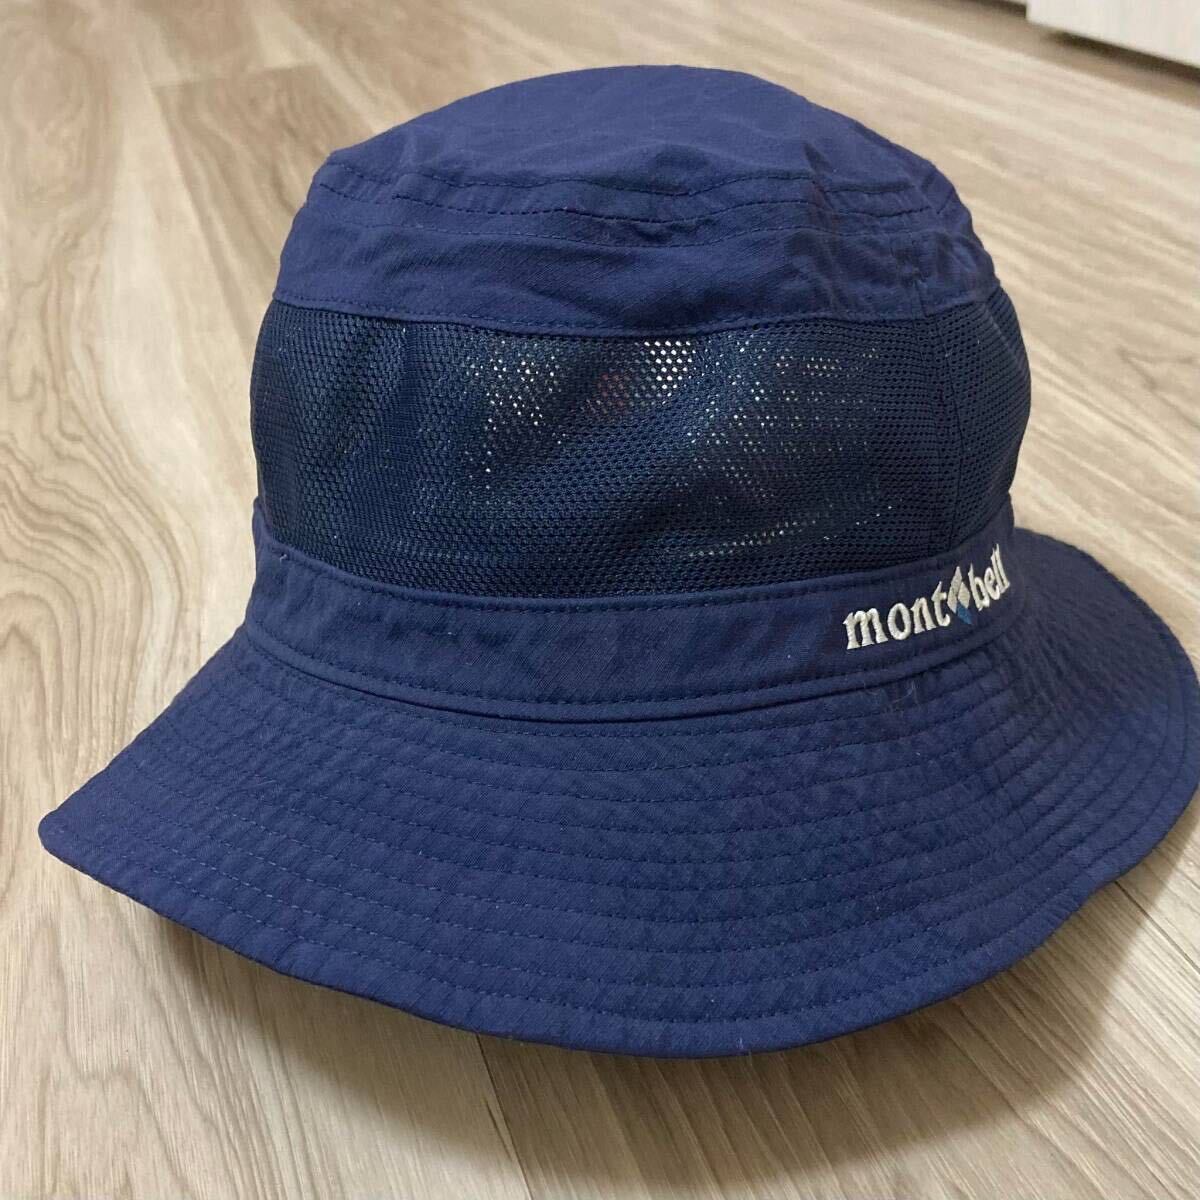  free shipping * Mont Bell L 58-60cm light weight outdoor hat tatami .. compact ventilation mesh mont-bell embroidery Logo hat good quality goods 500 navy 